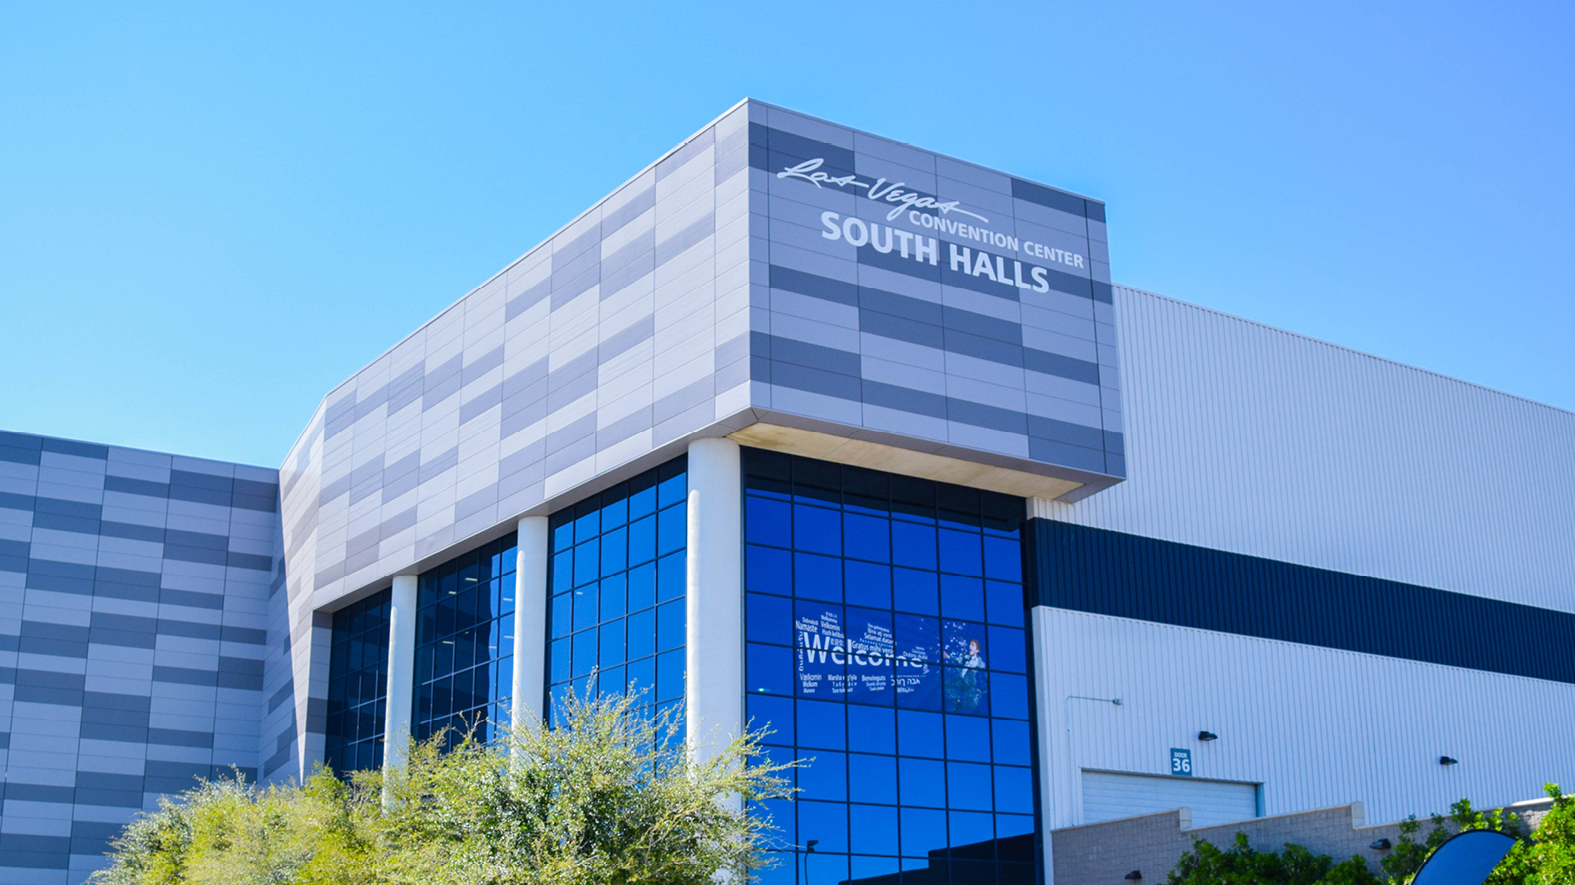 A photo of the Las Vegas Convention Center's South Hall